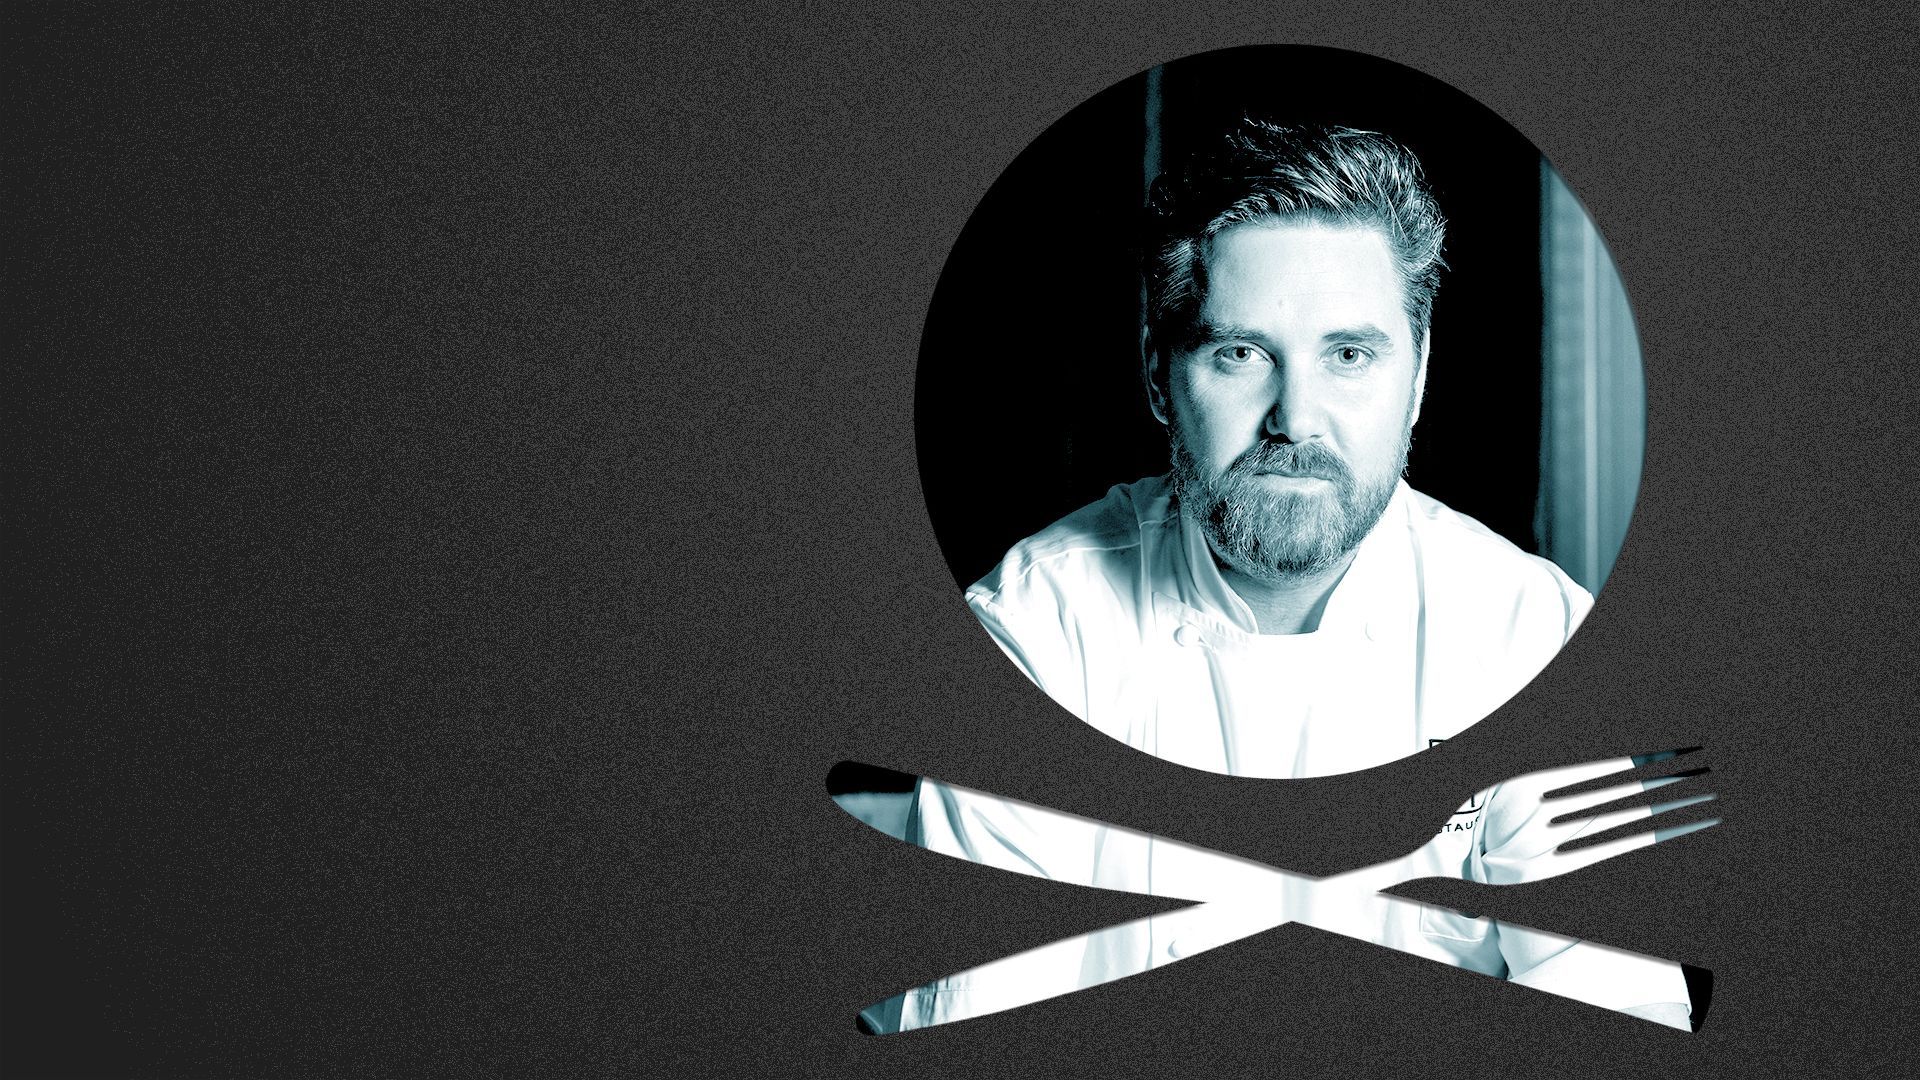 Photo illustration of a place setting shaped like a skull and crossbones containing a photo of Chef John Fraser.